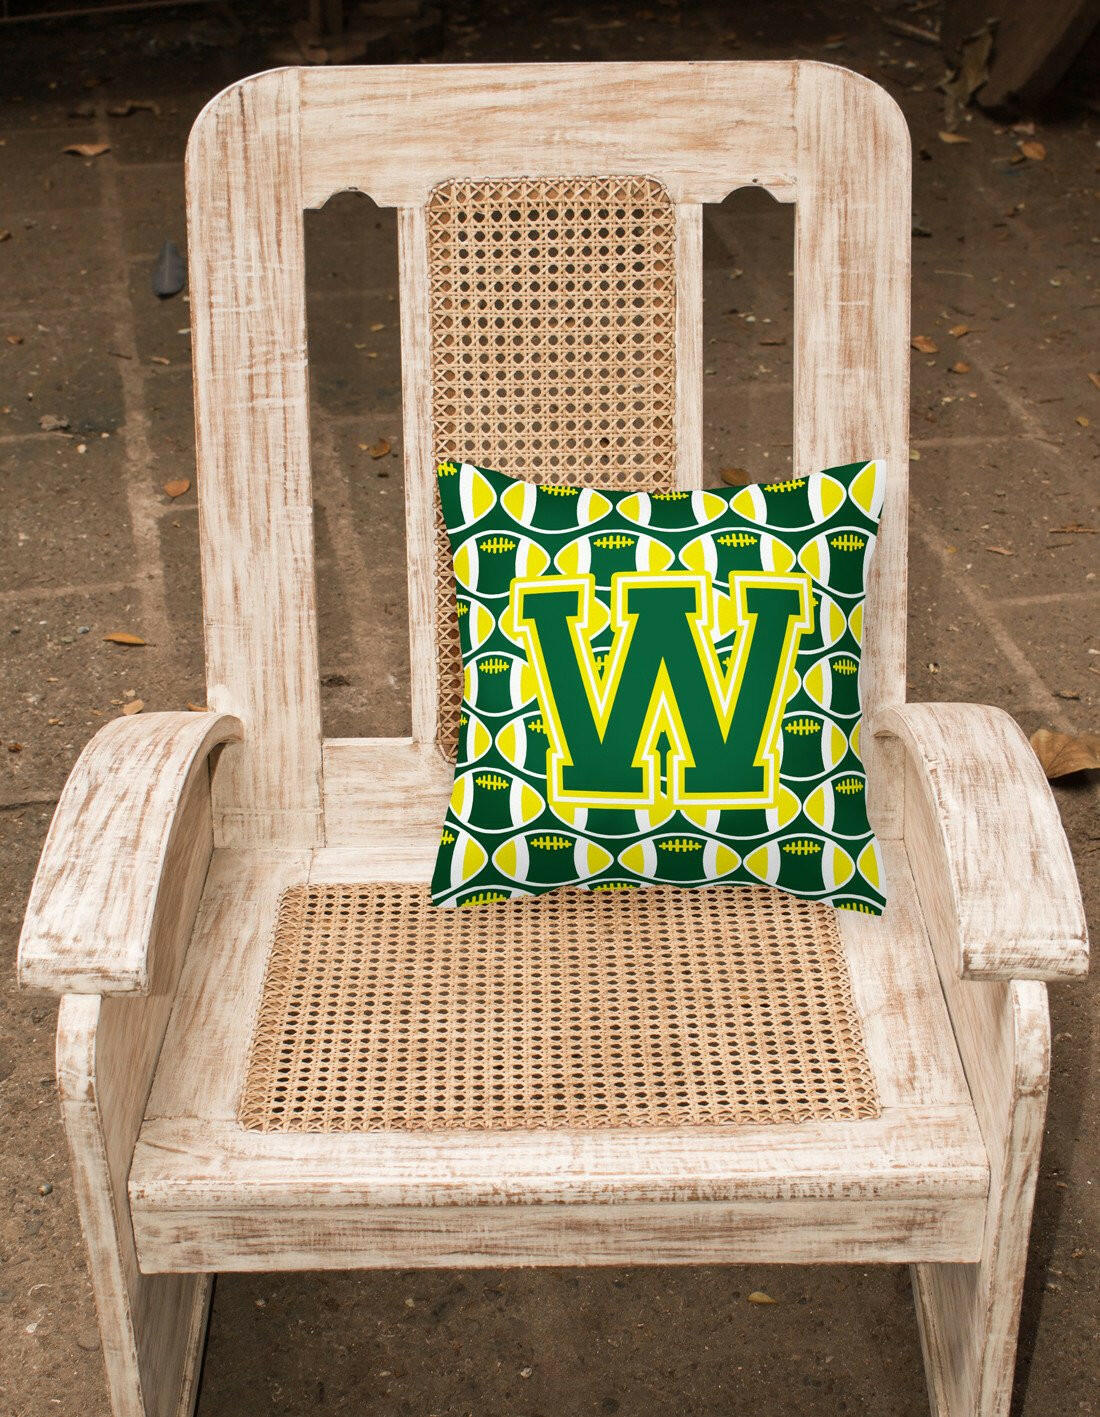 Letter W Football Green and Yellow Fabric Decorative Pillow CJ1075-WPW1414 by Caroline's Treasures